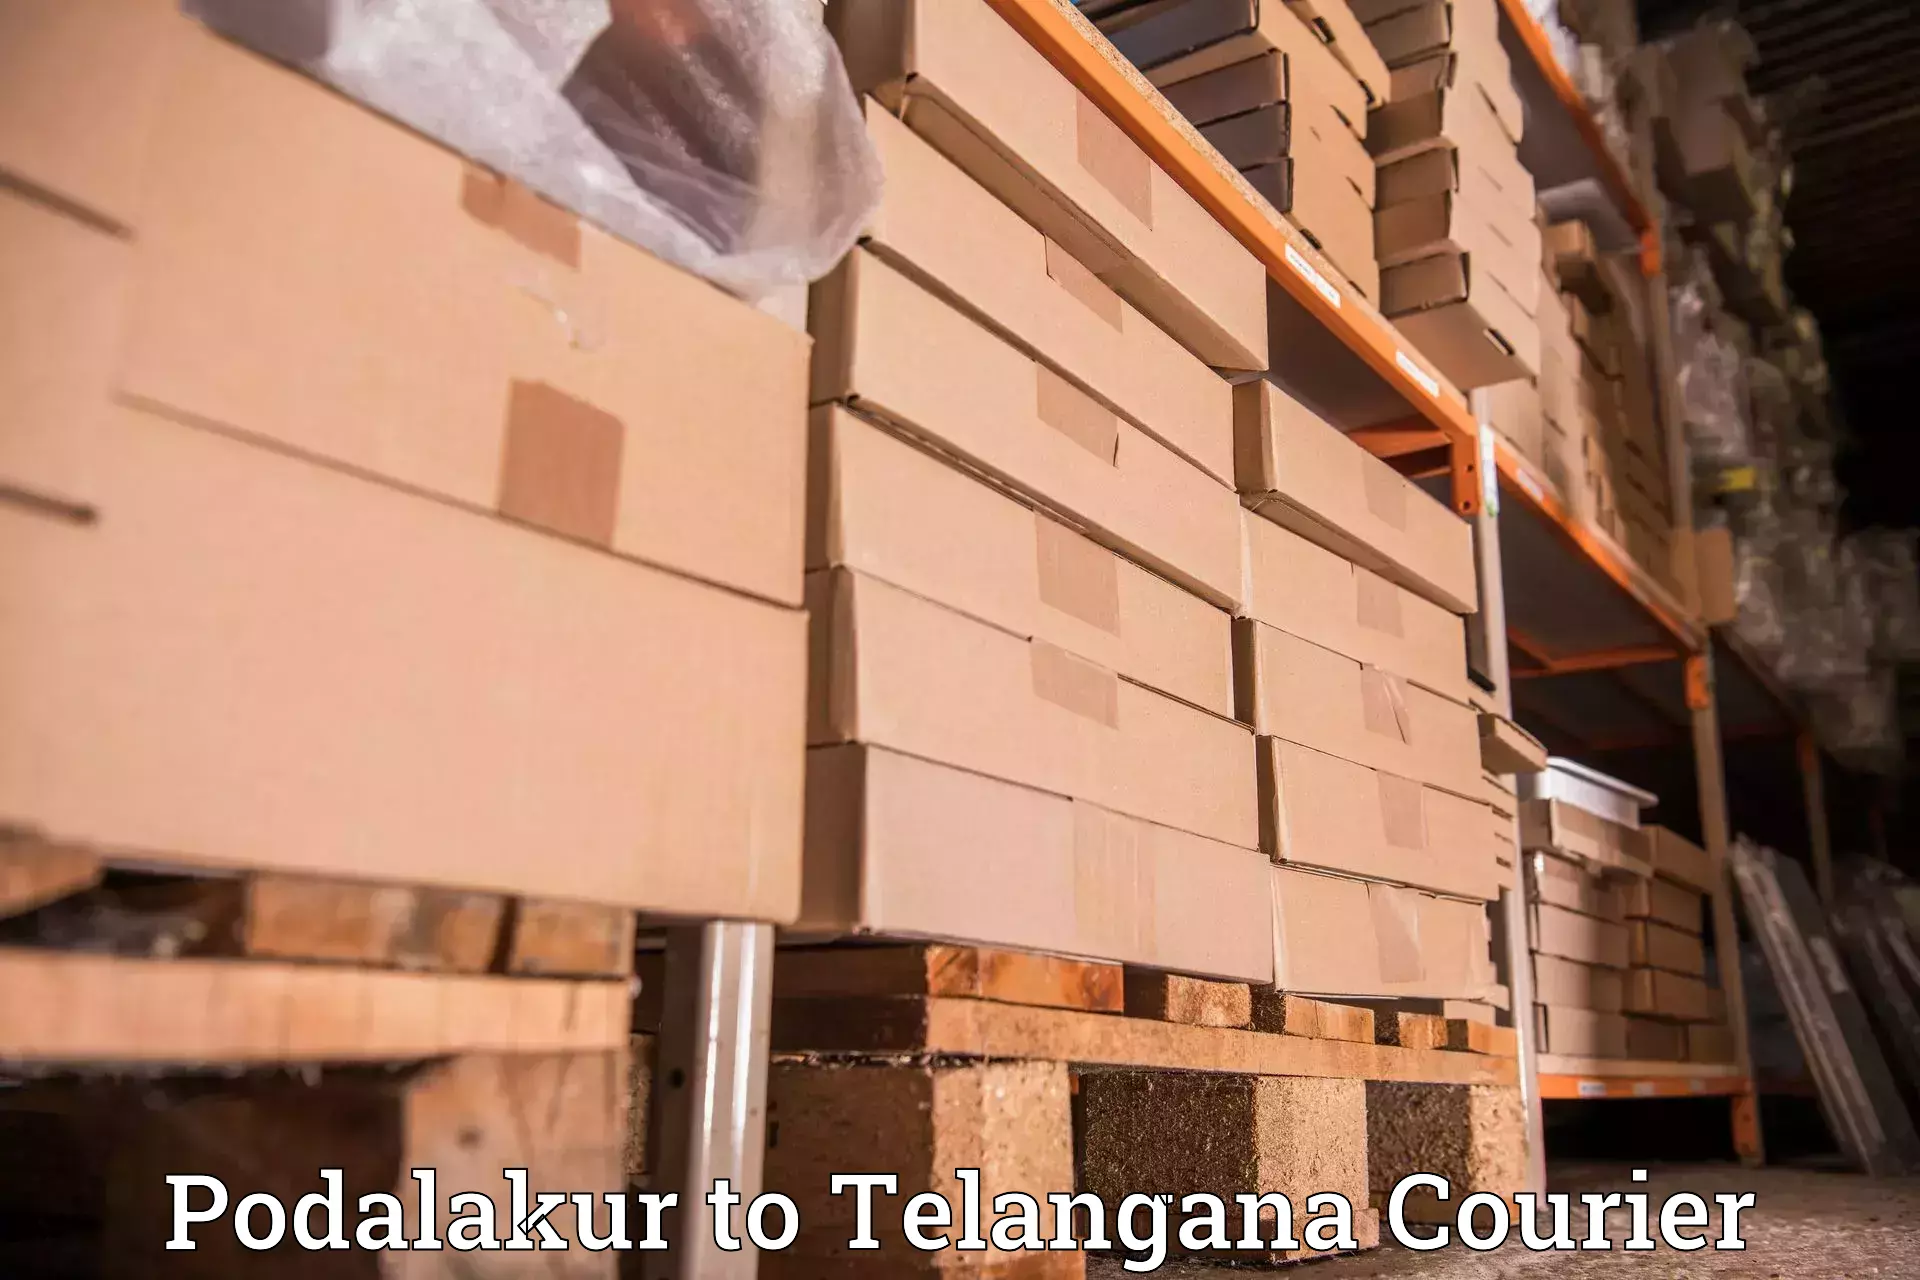 On-call courier service Podalakur to Vemulawada